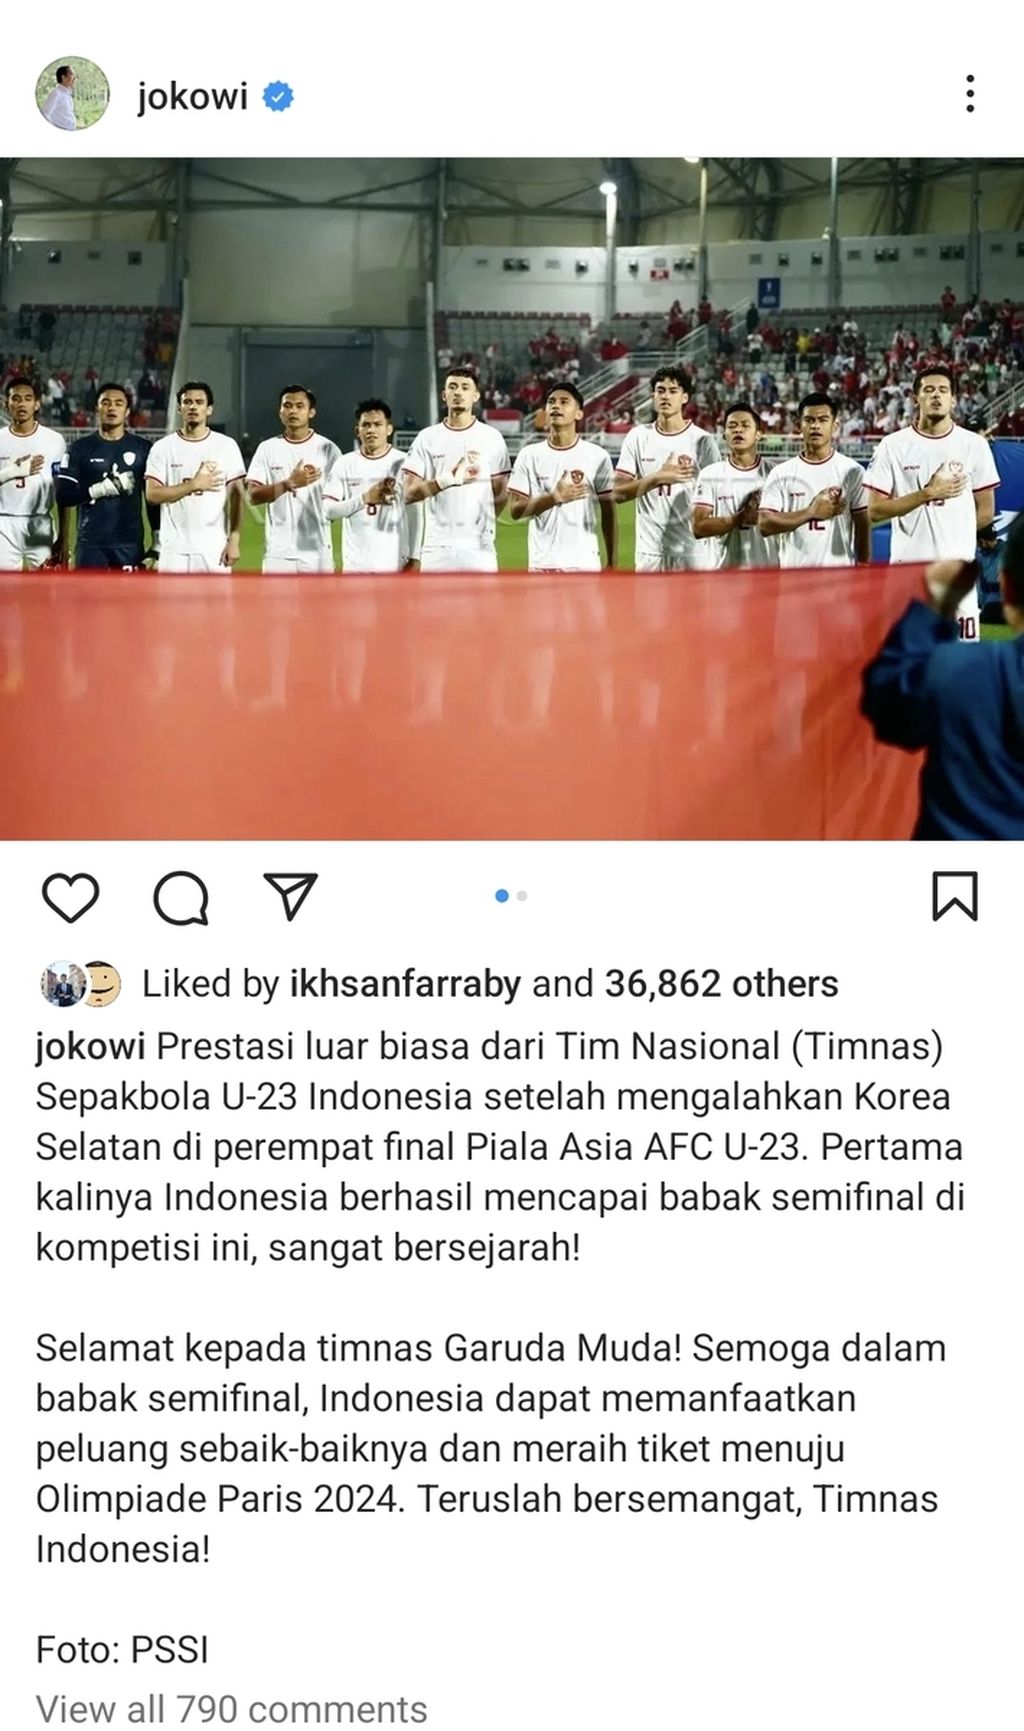 President Joko Widodo appreciates the victory of the Indonesian U-23 team in the quarterfinals of the U-23 Asia Cup on Friday (26/4/2024). The post has received more than 36,000 likes and over 2,200 comments in 20 minutes.